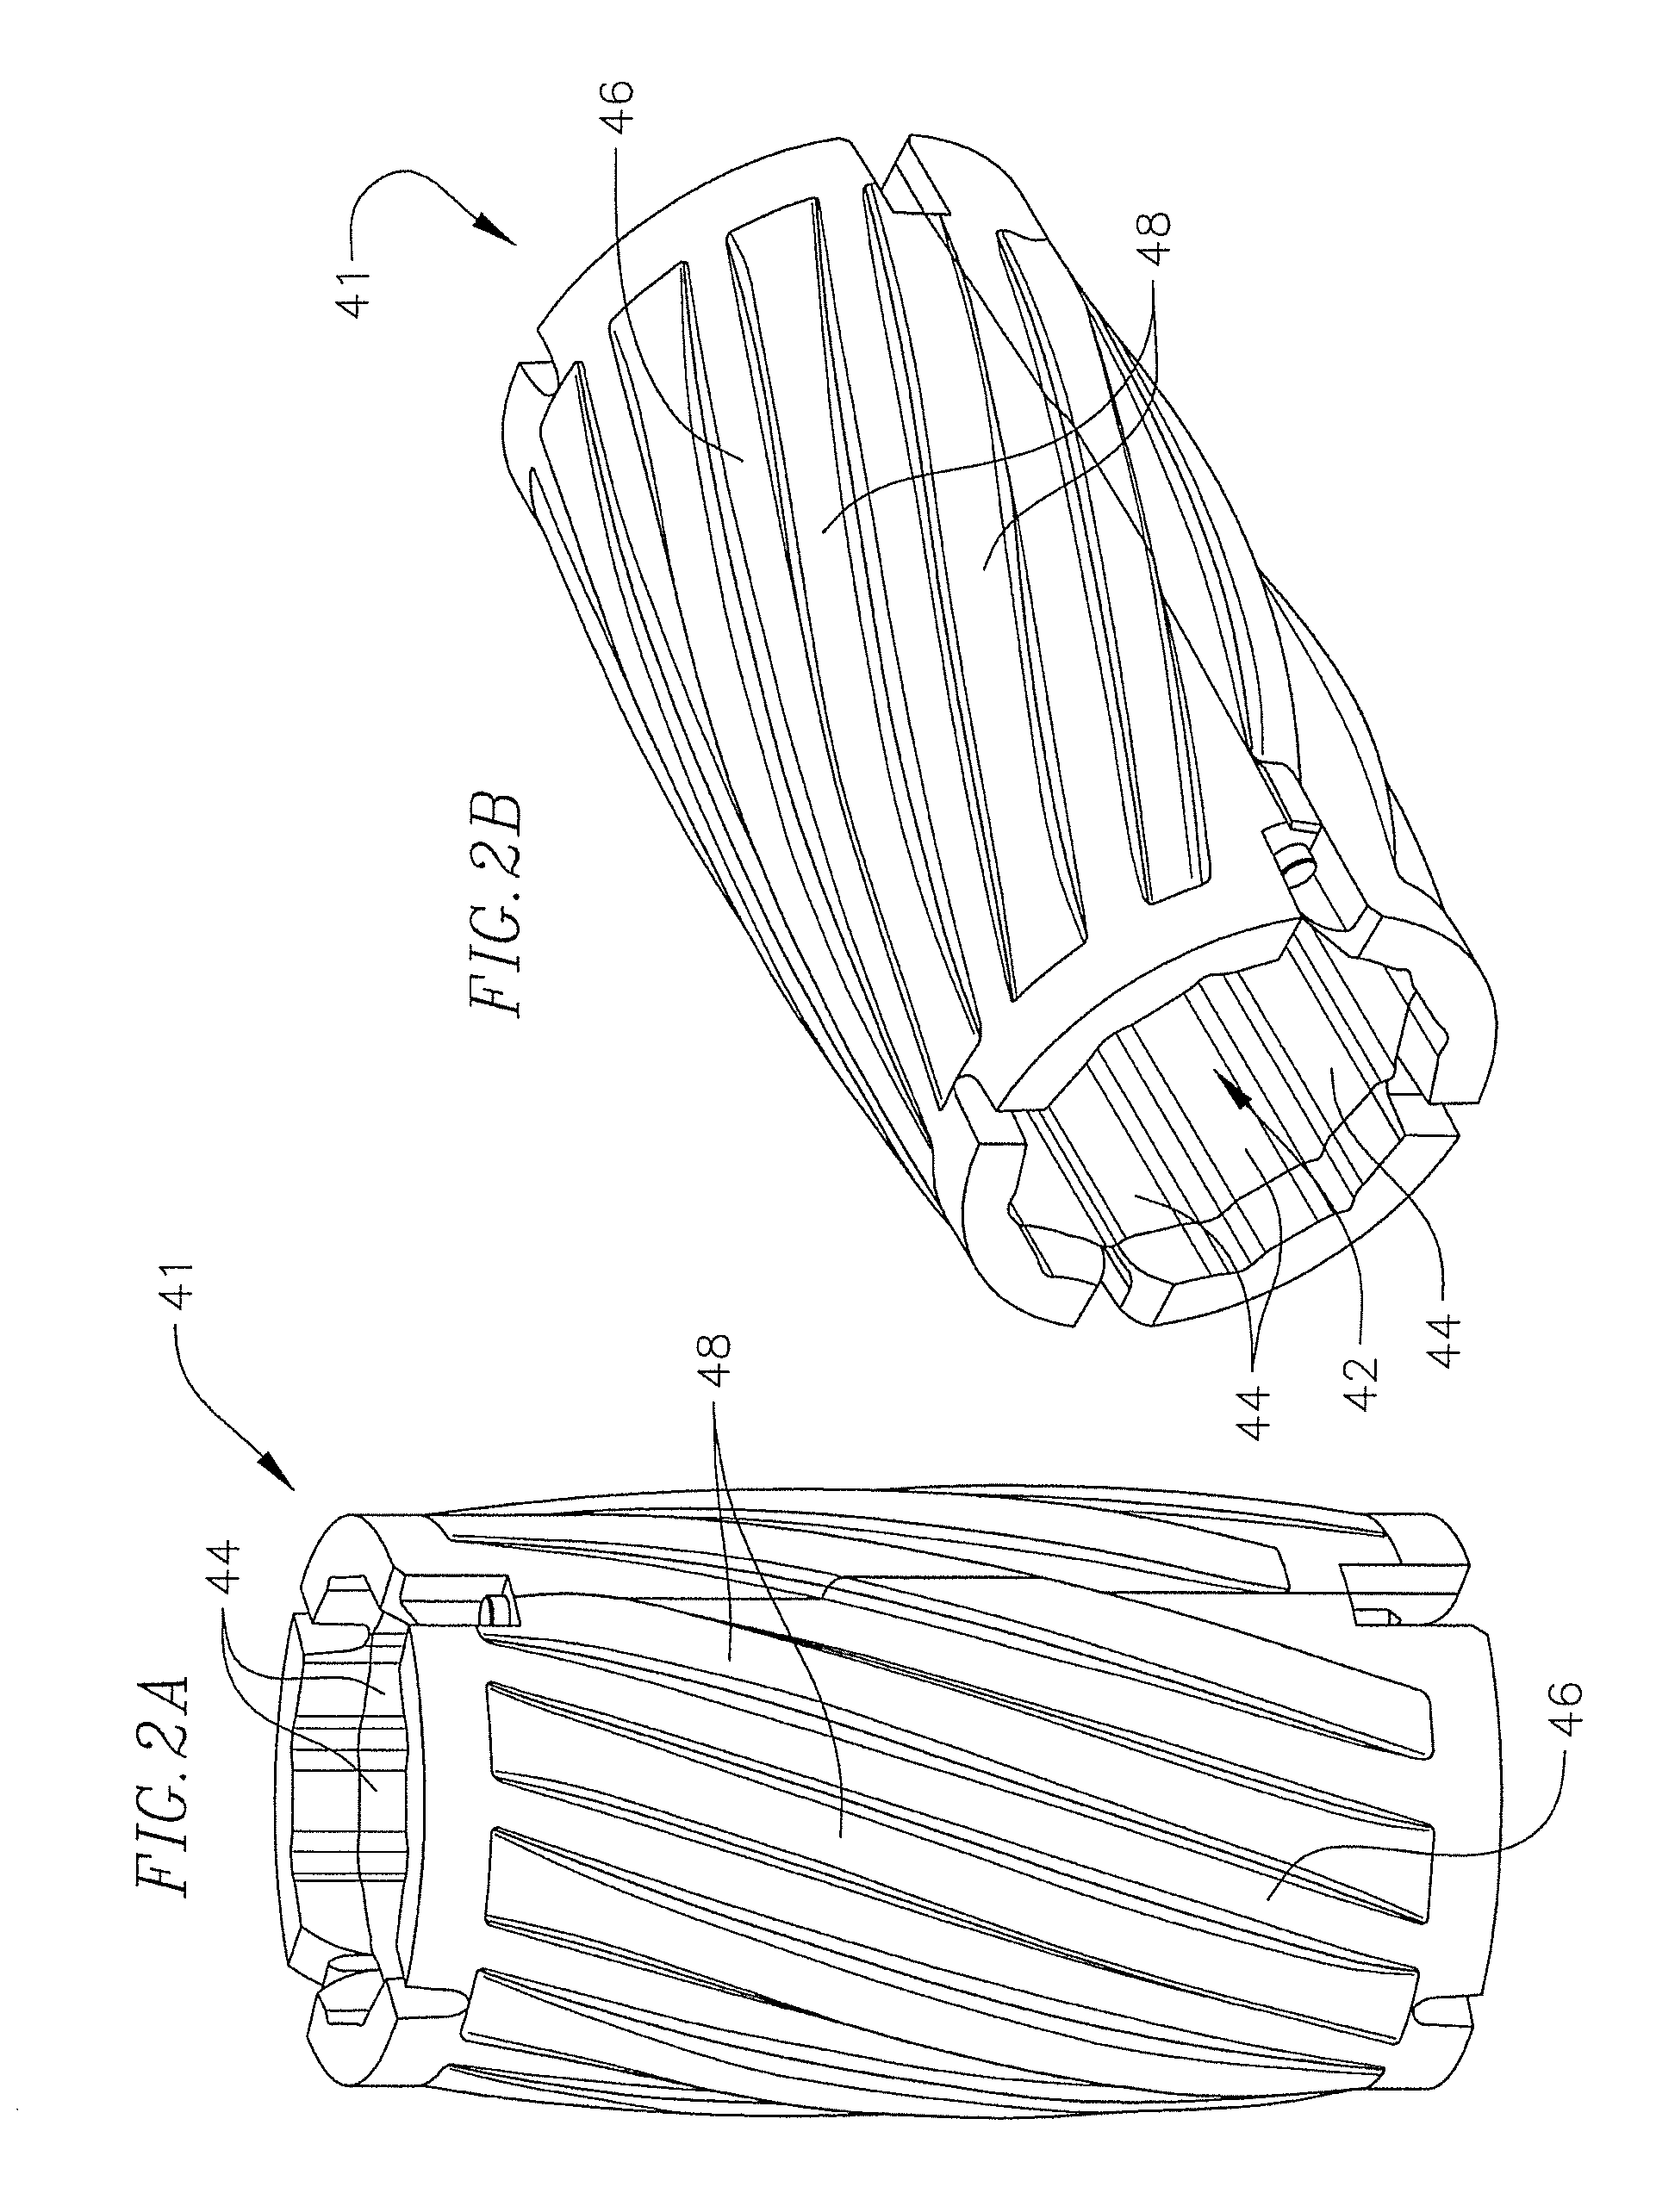 Open hole non-rotating sleeve and assembly